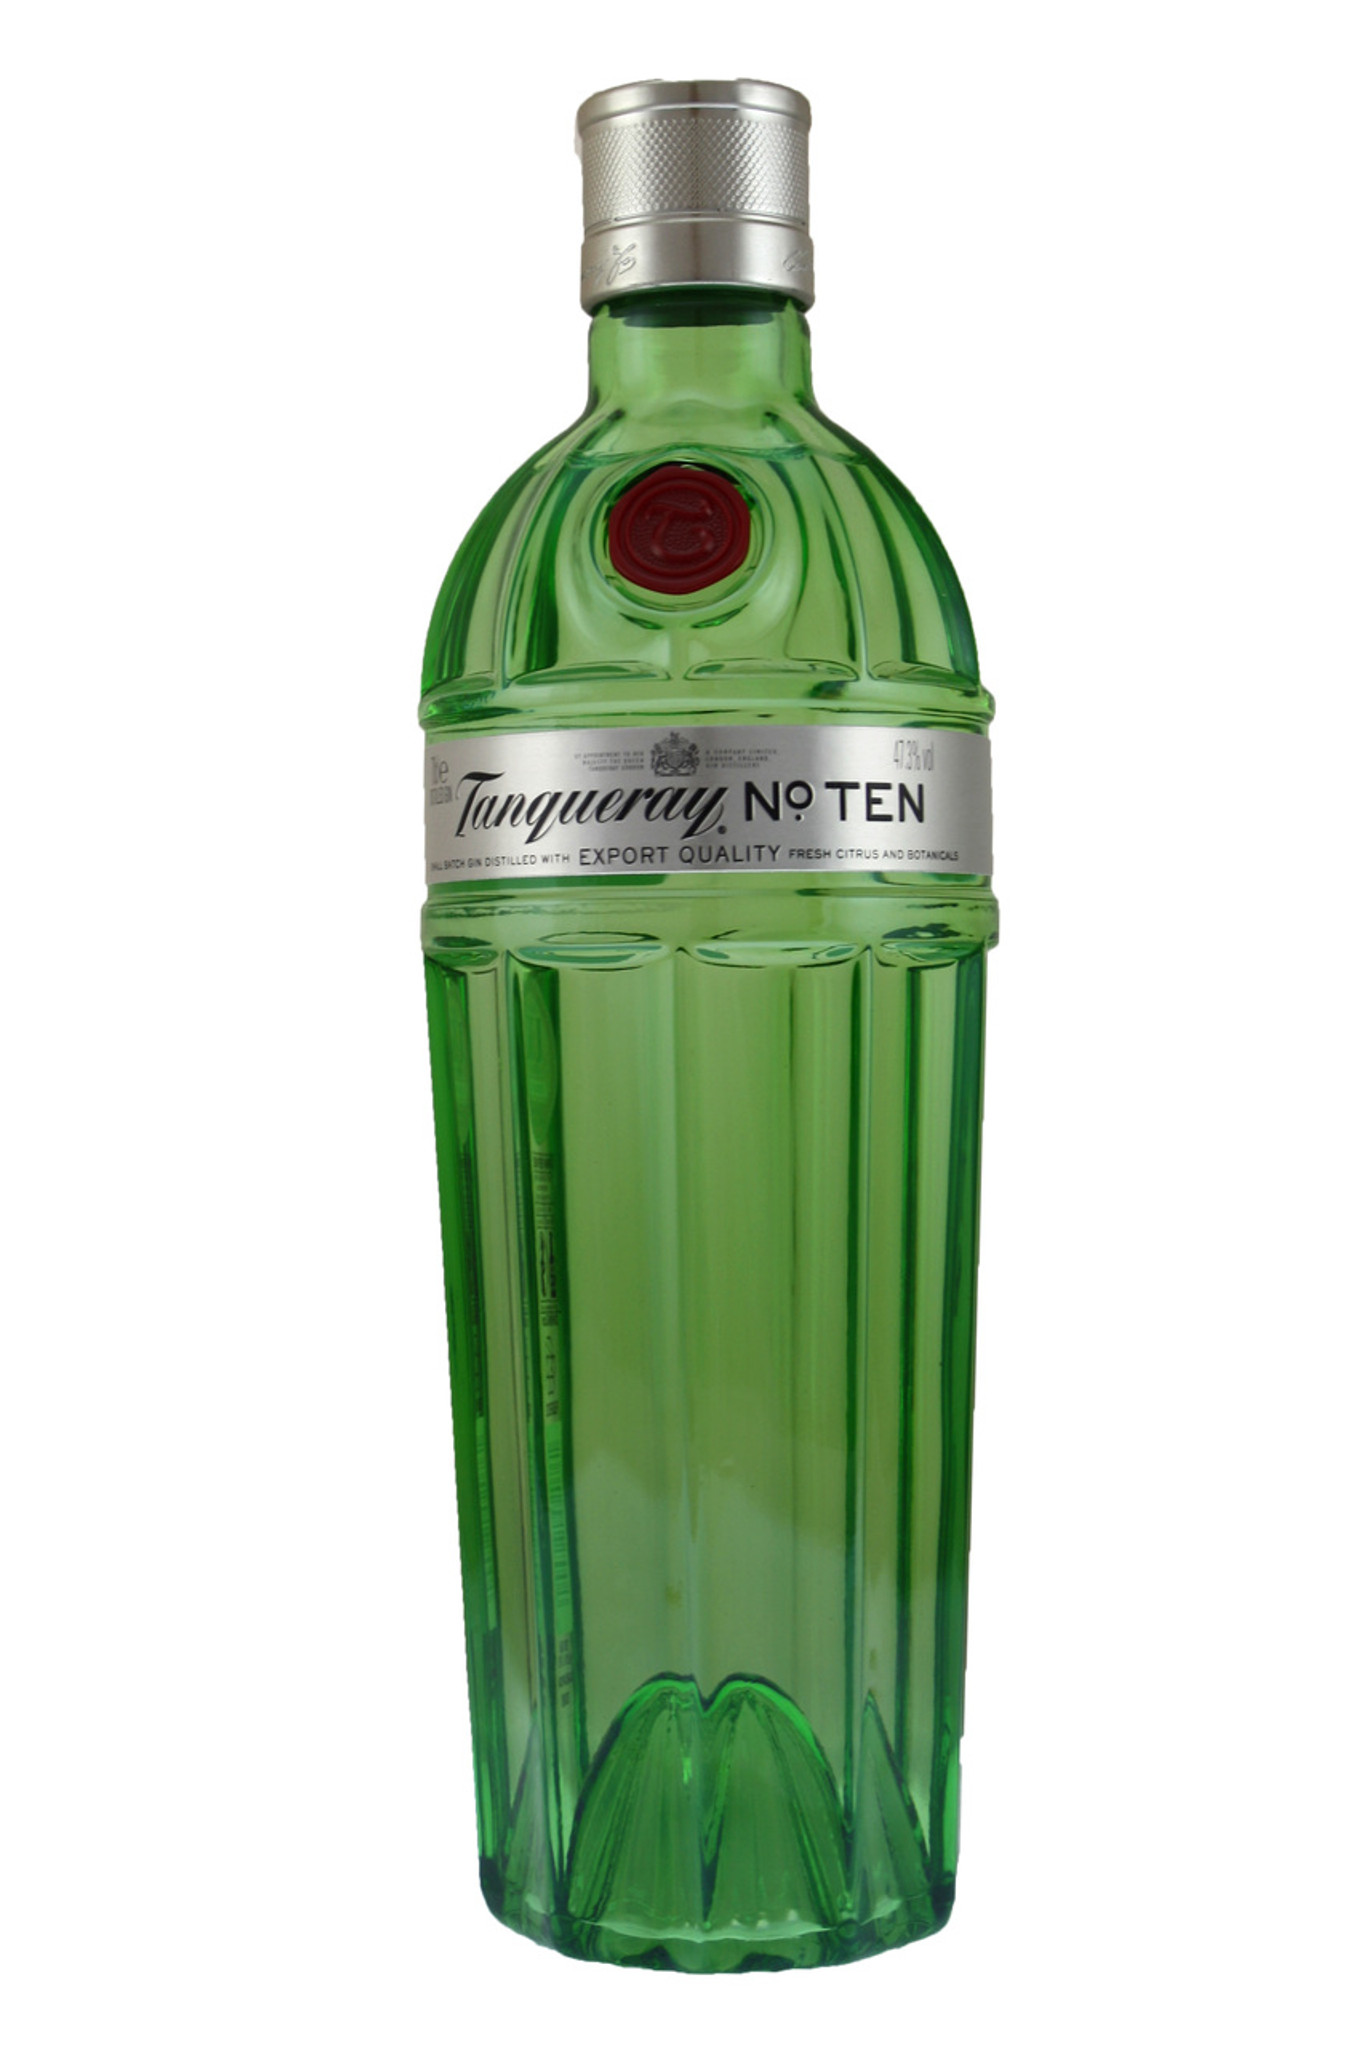 Tanqueray Gin No 10 Tanquerary from Fraziers Wine Merchants